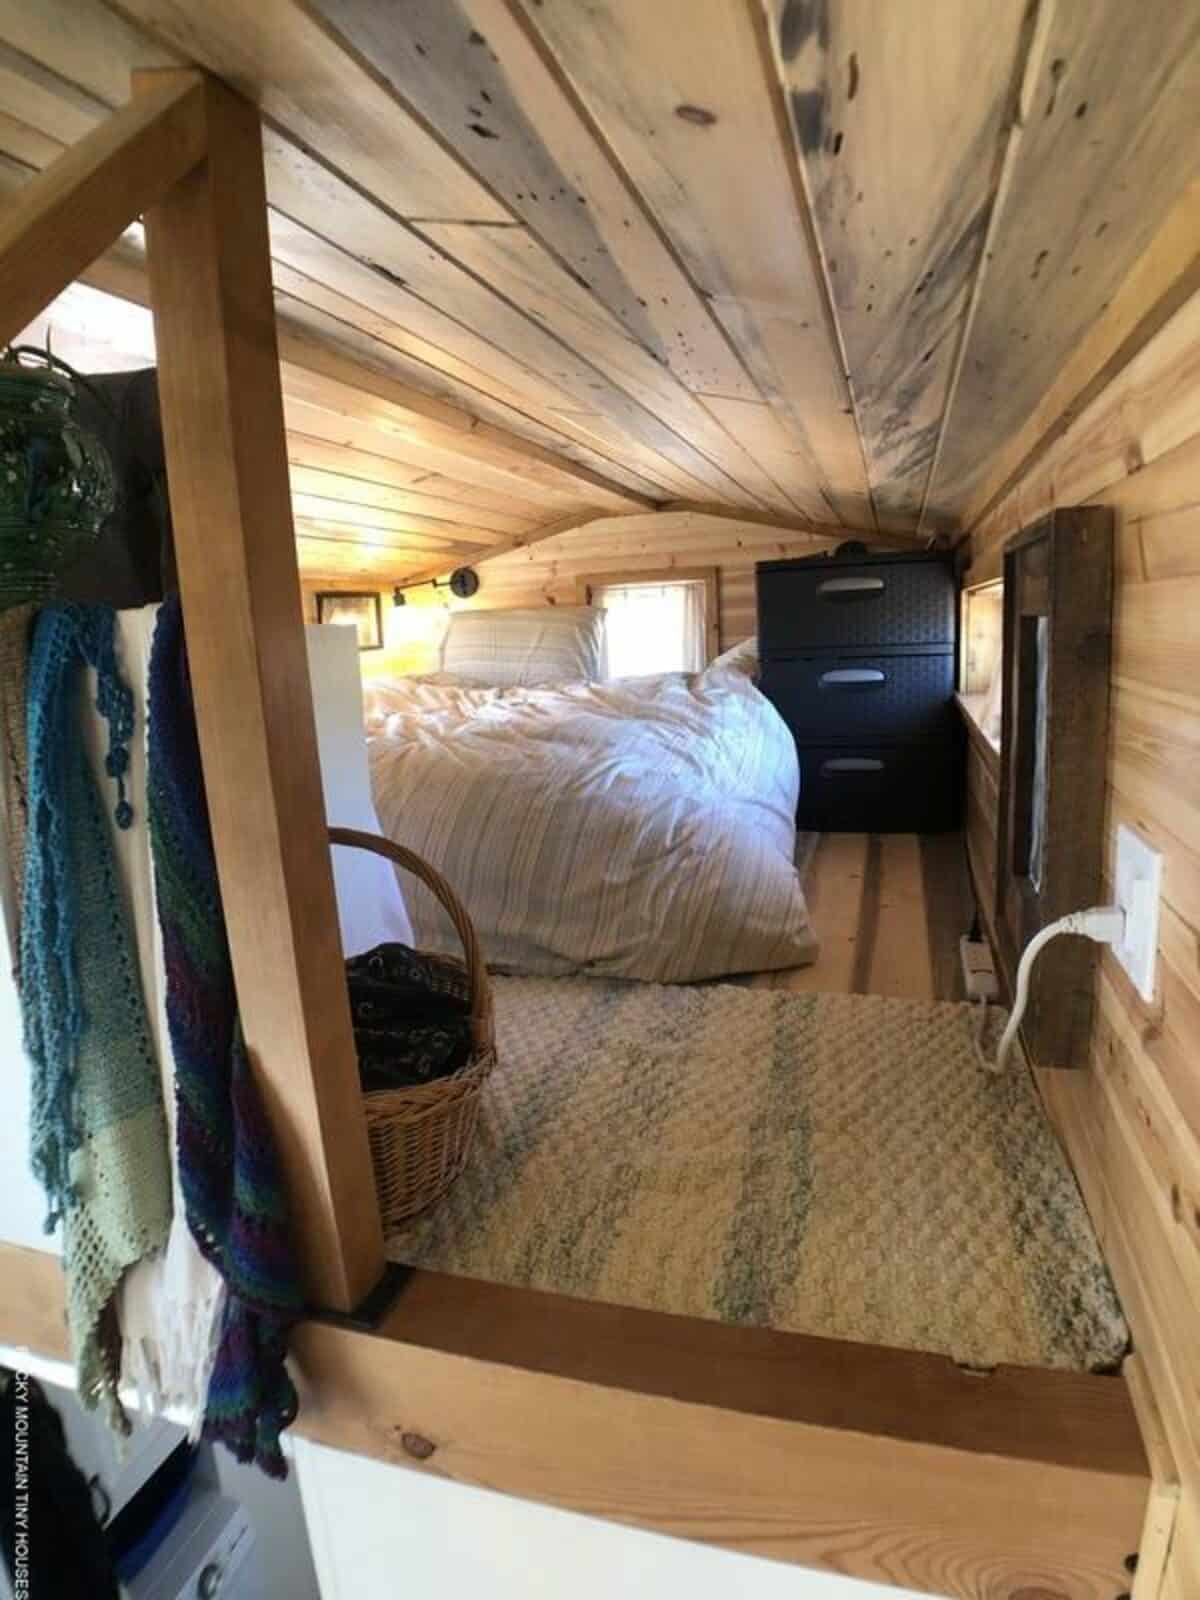 Sleeping loft with windows for natural light, comfortable bed, and cozy crawlspace loft